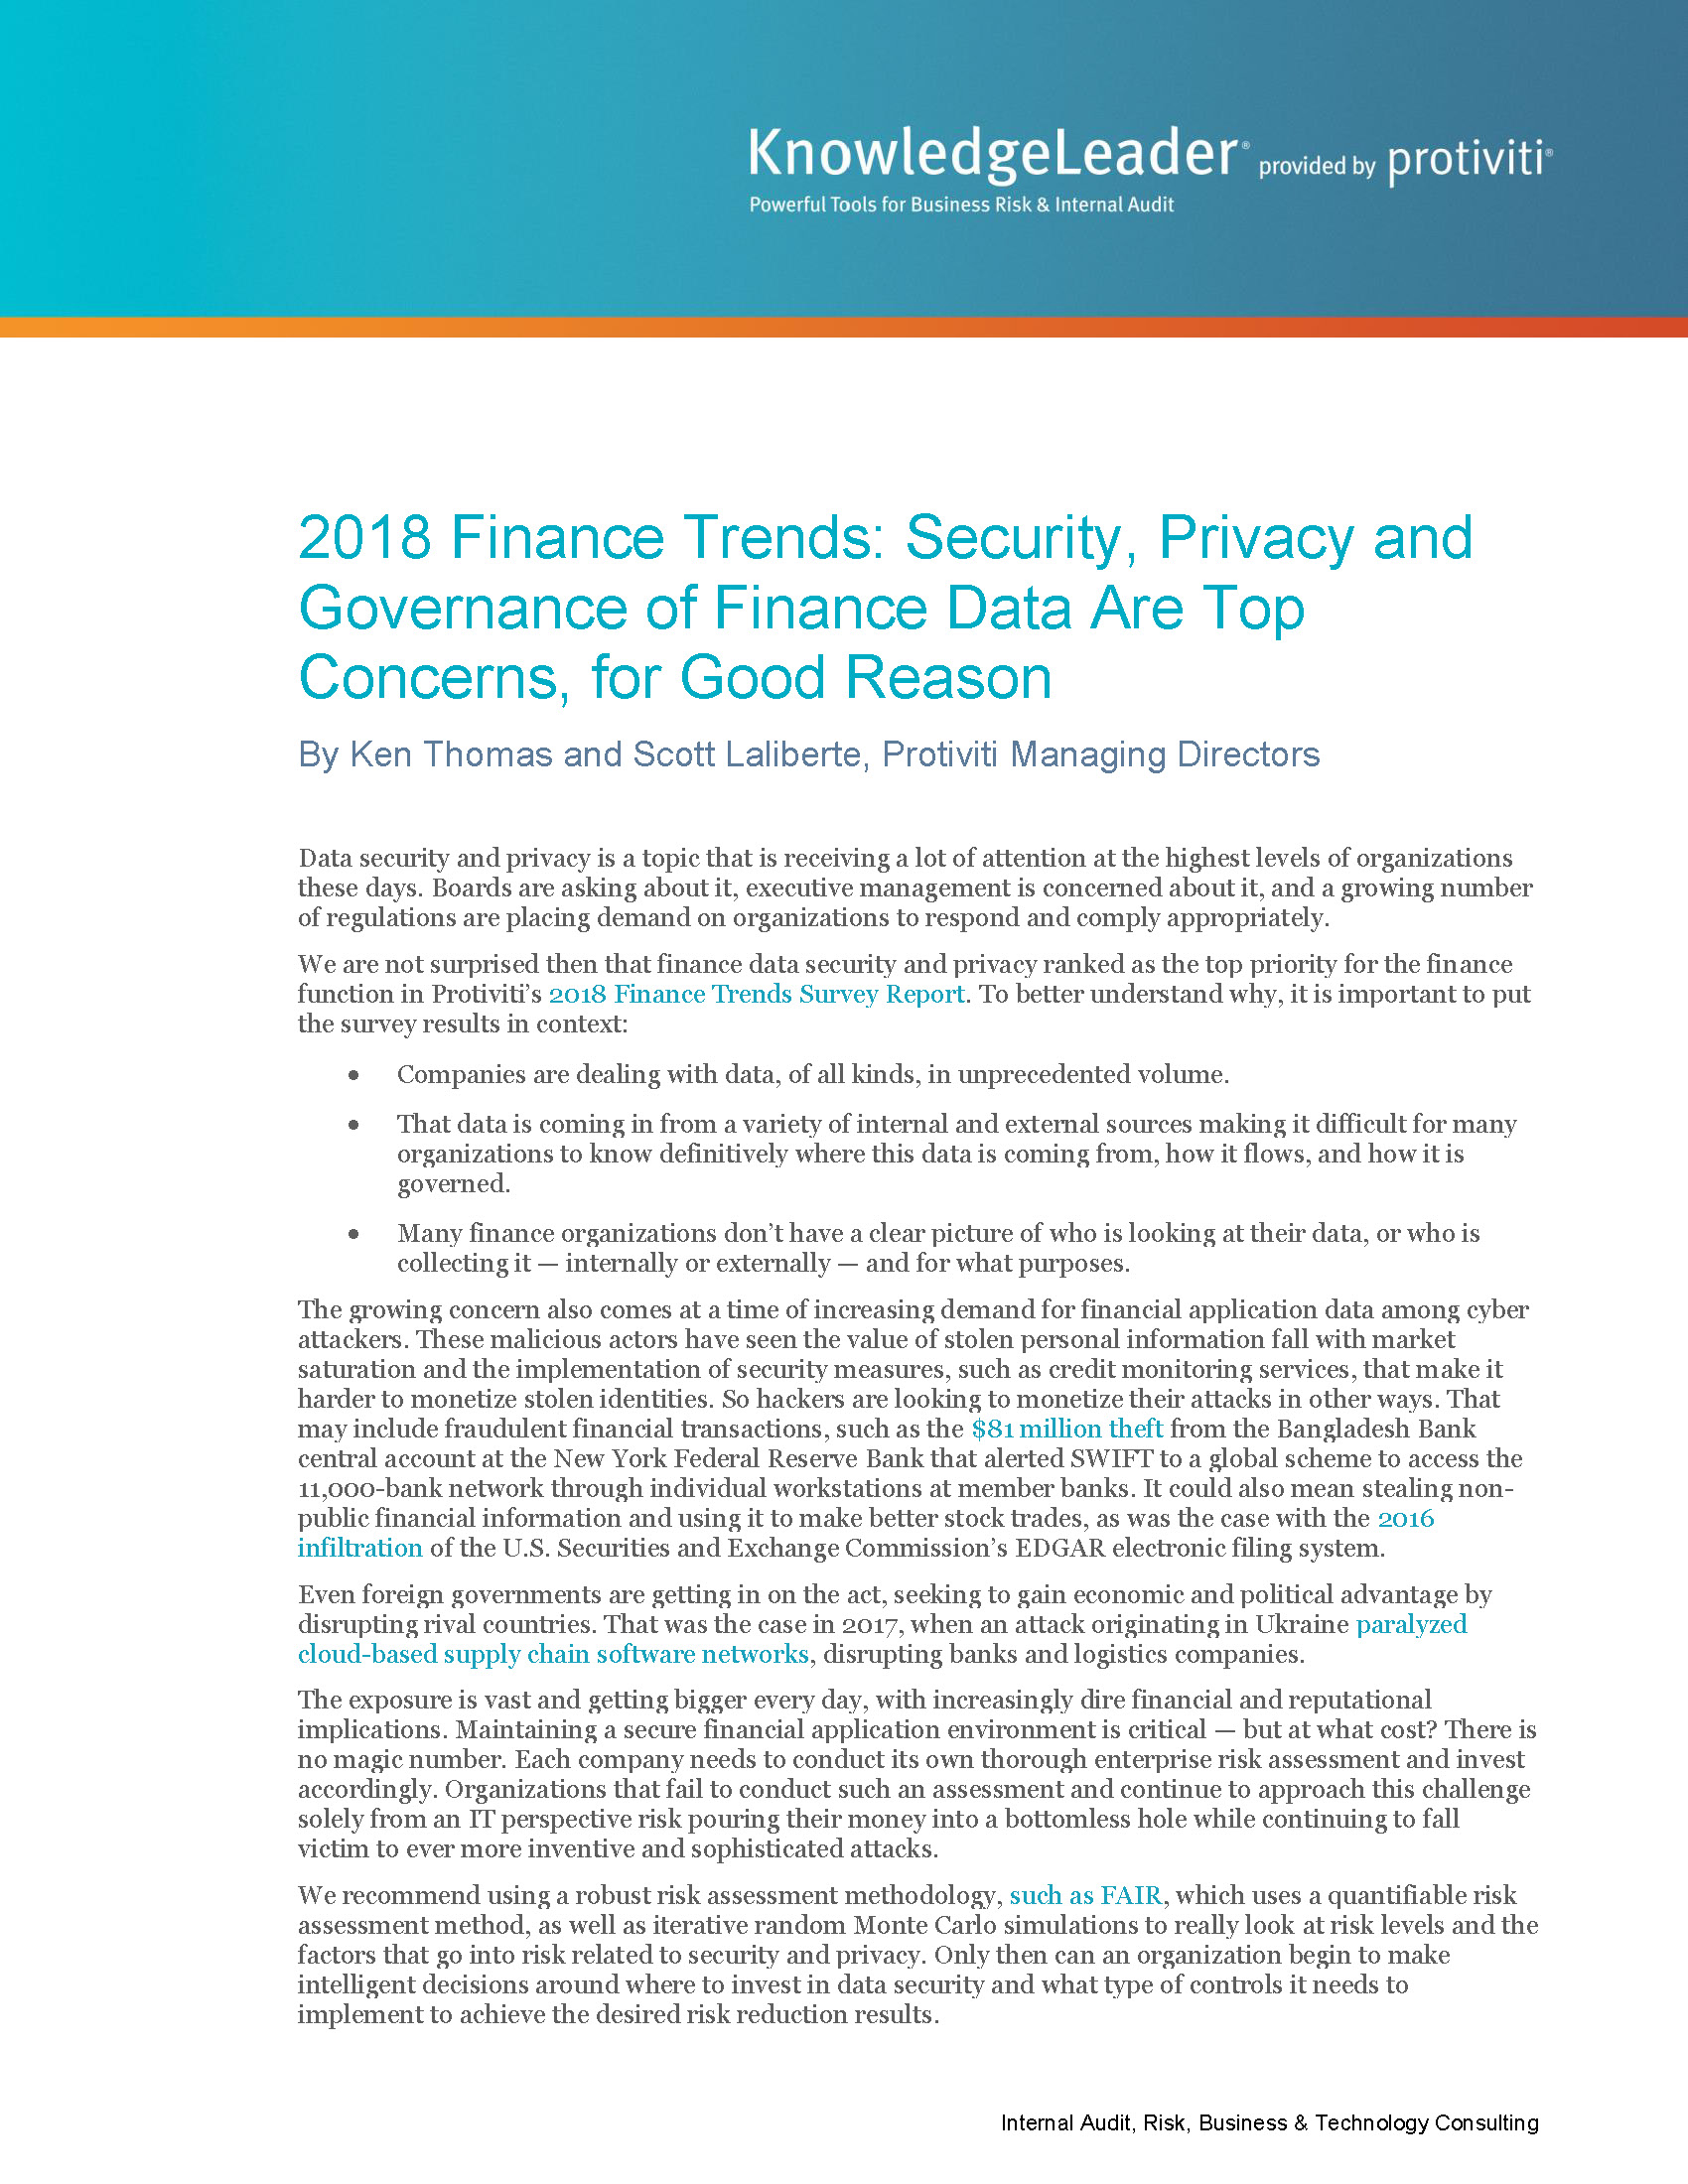 Screenshot of the first page of 2018 Finance Trends: Security, Privacy and Governance of Finance Data Are Top Concerns, for Good Reason